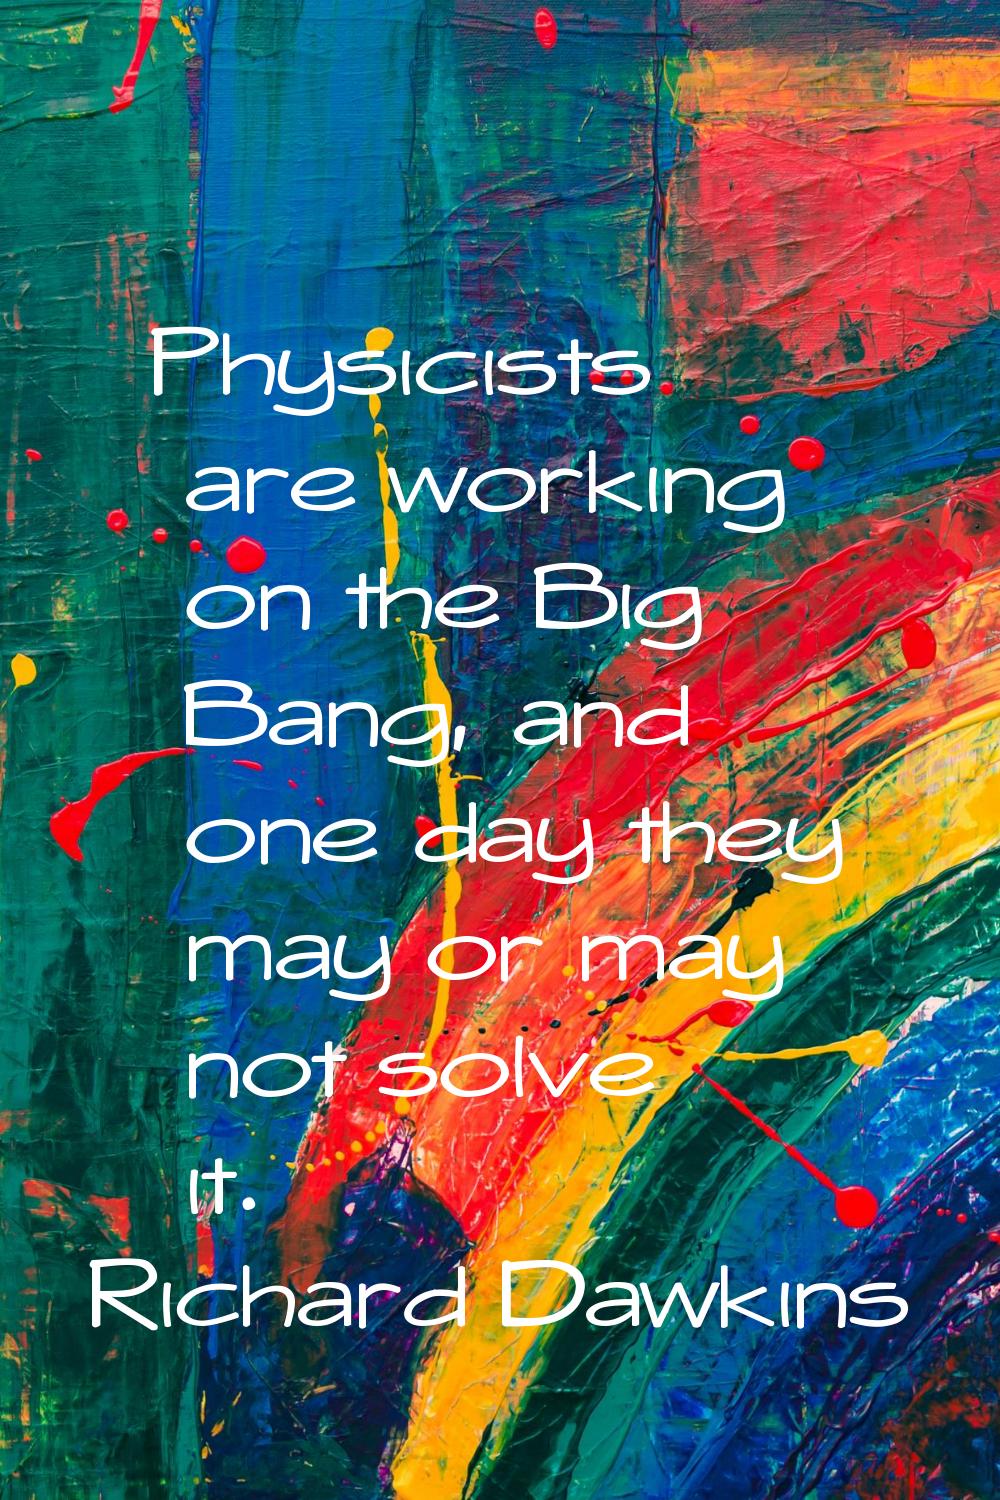 Physicists are working on the Big Bang, and one day they may or may not solve it.